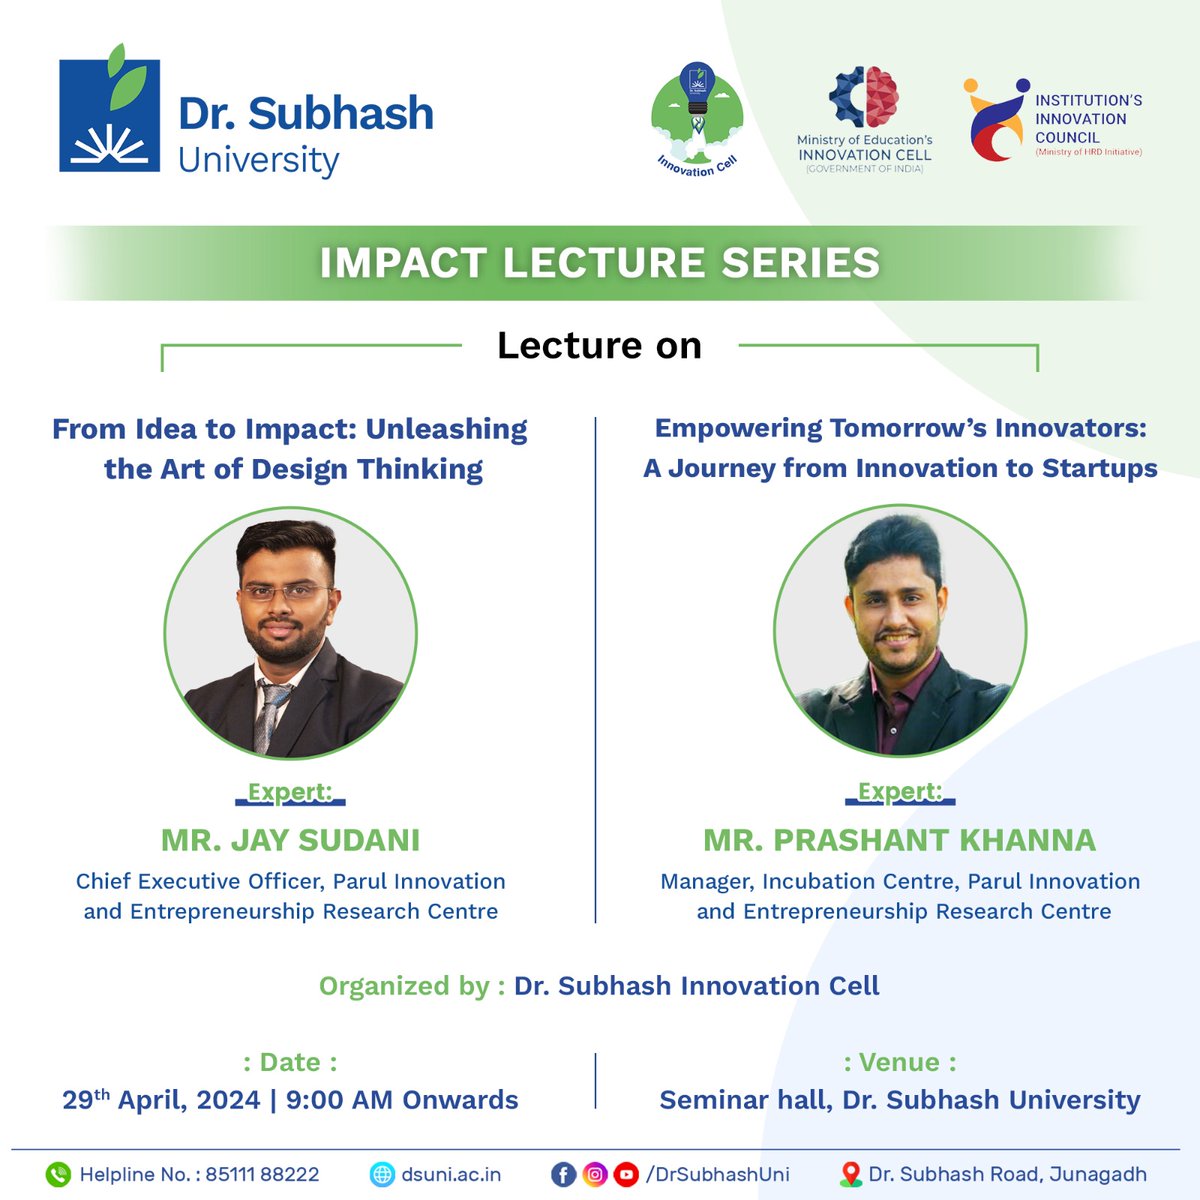 Discover the magic of transforming ideas into game-changing impact! Mark your calendars for April 29th at DSU. Our Impact Lecture Series will delve deep into Design Thinking and the roadmap to startup success. #Innovation #Startups #ImpactLectureSeries #DSU #DrSubhashUniversity